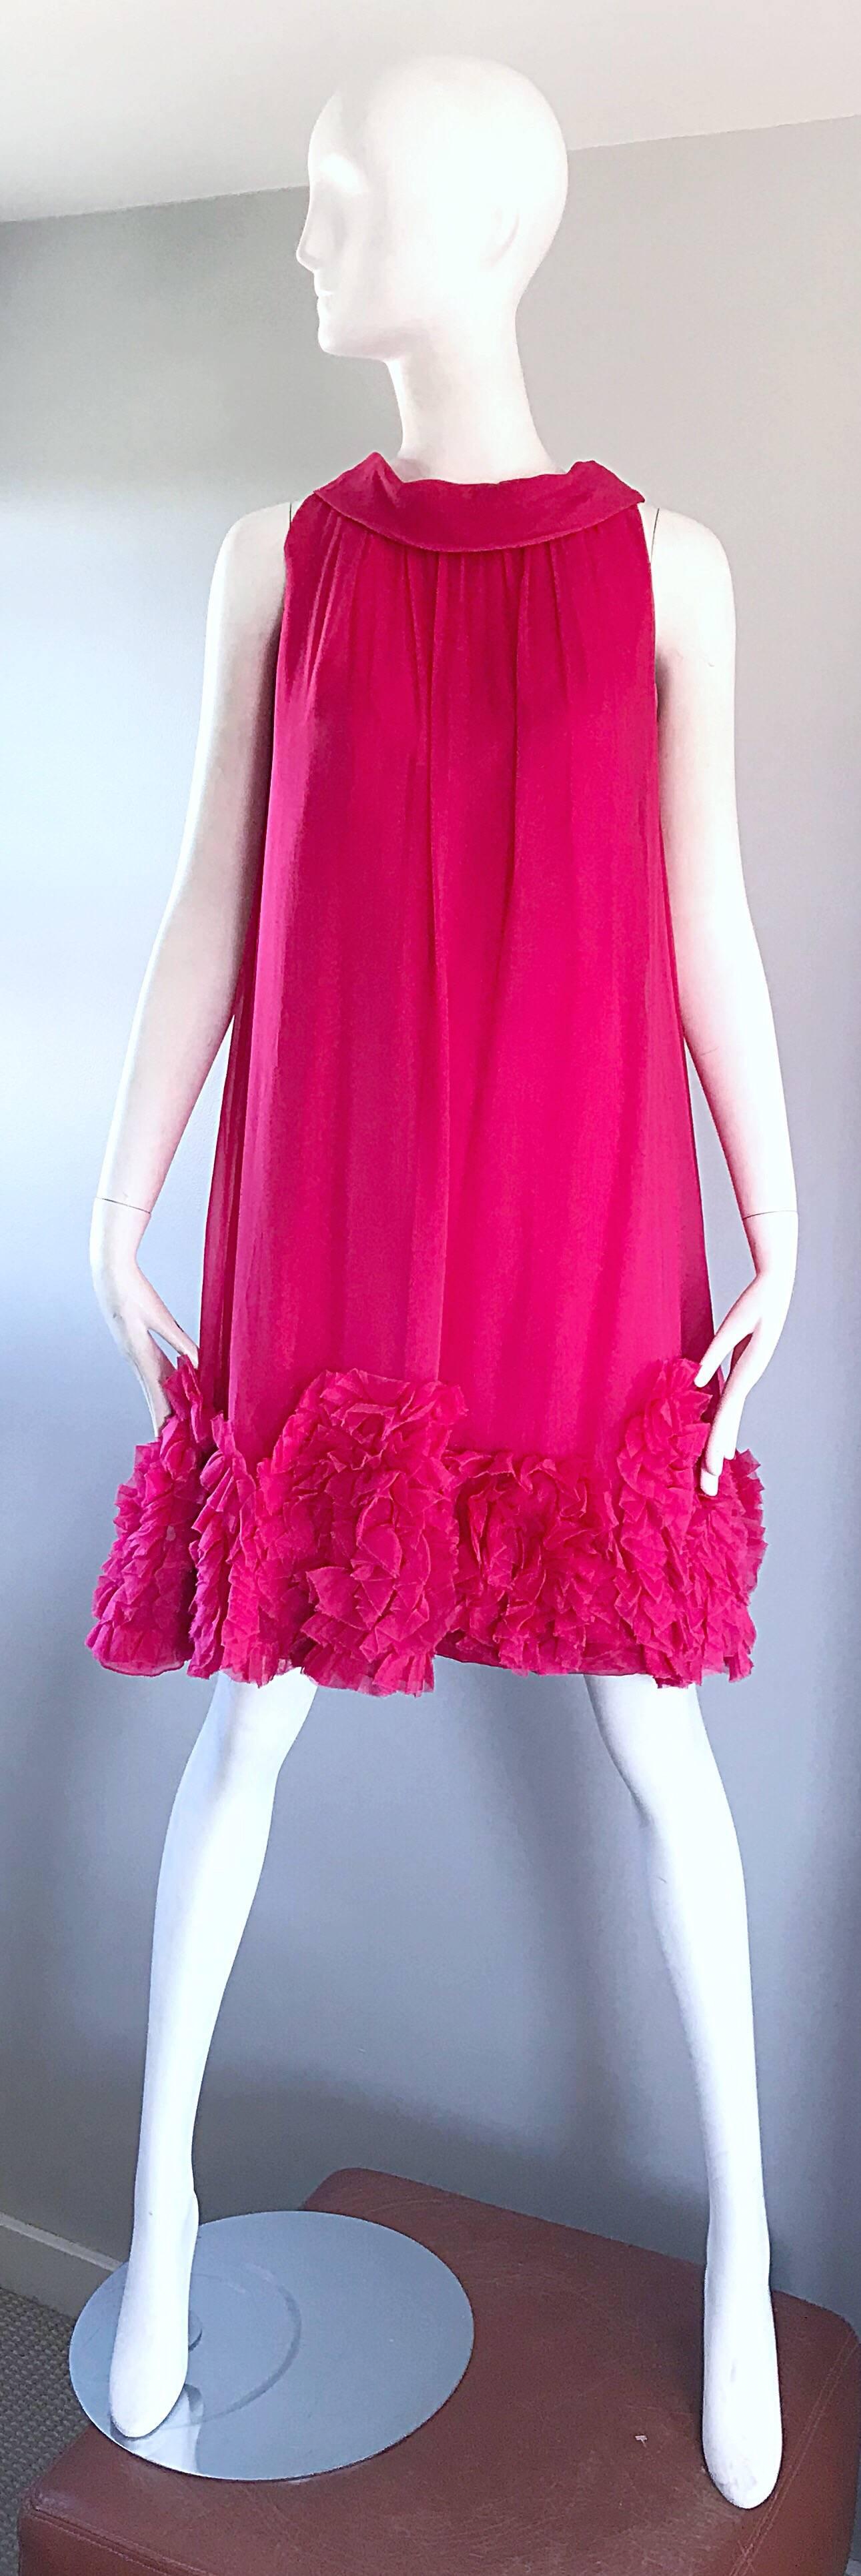 Phenomenal vintage 60s hot pink silk chiffon trapeze empire waist babydoll dress! Features a high neck, with a trapeze fit. Ruffle details at the hem. Full metal zipper up the back with hook-and-eye closure. Amazing attention to detail on this